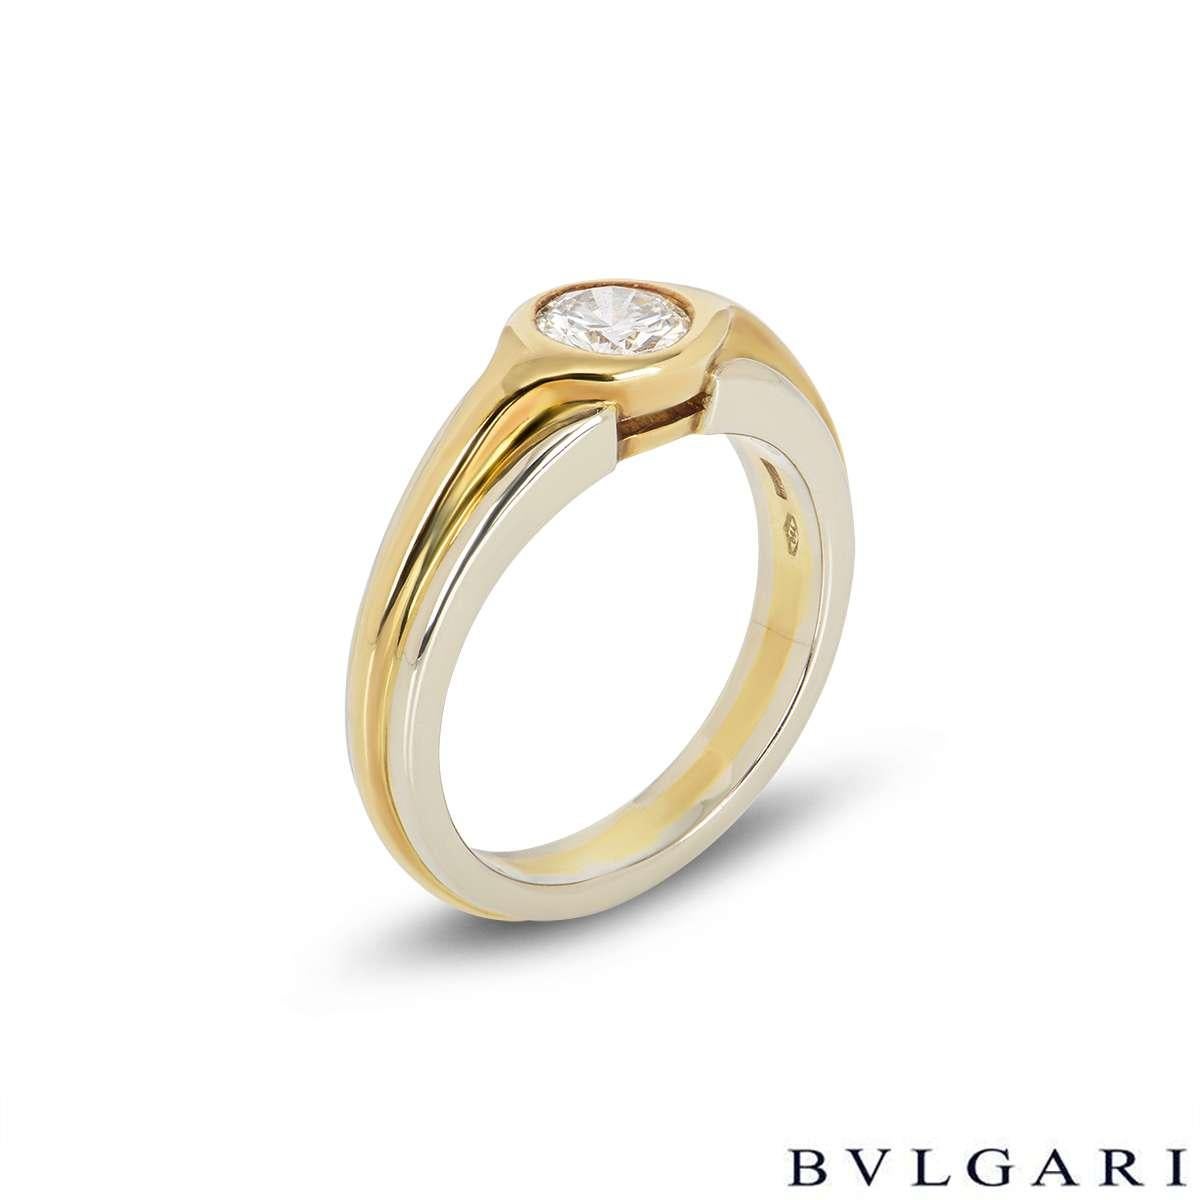 A unique 18k white and yellow gold Bvlgari diamond engagement ring. The ring comprises of a 0.50ct, H colour and VS clarity round brilliant cut diamond in a rubover setting. The ring features yellow gold and white gold band and measures a size UK L½